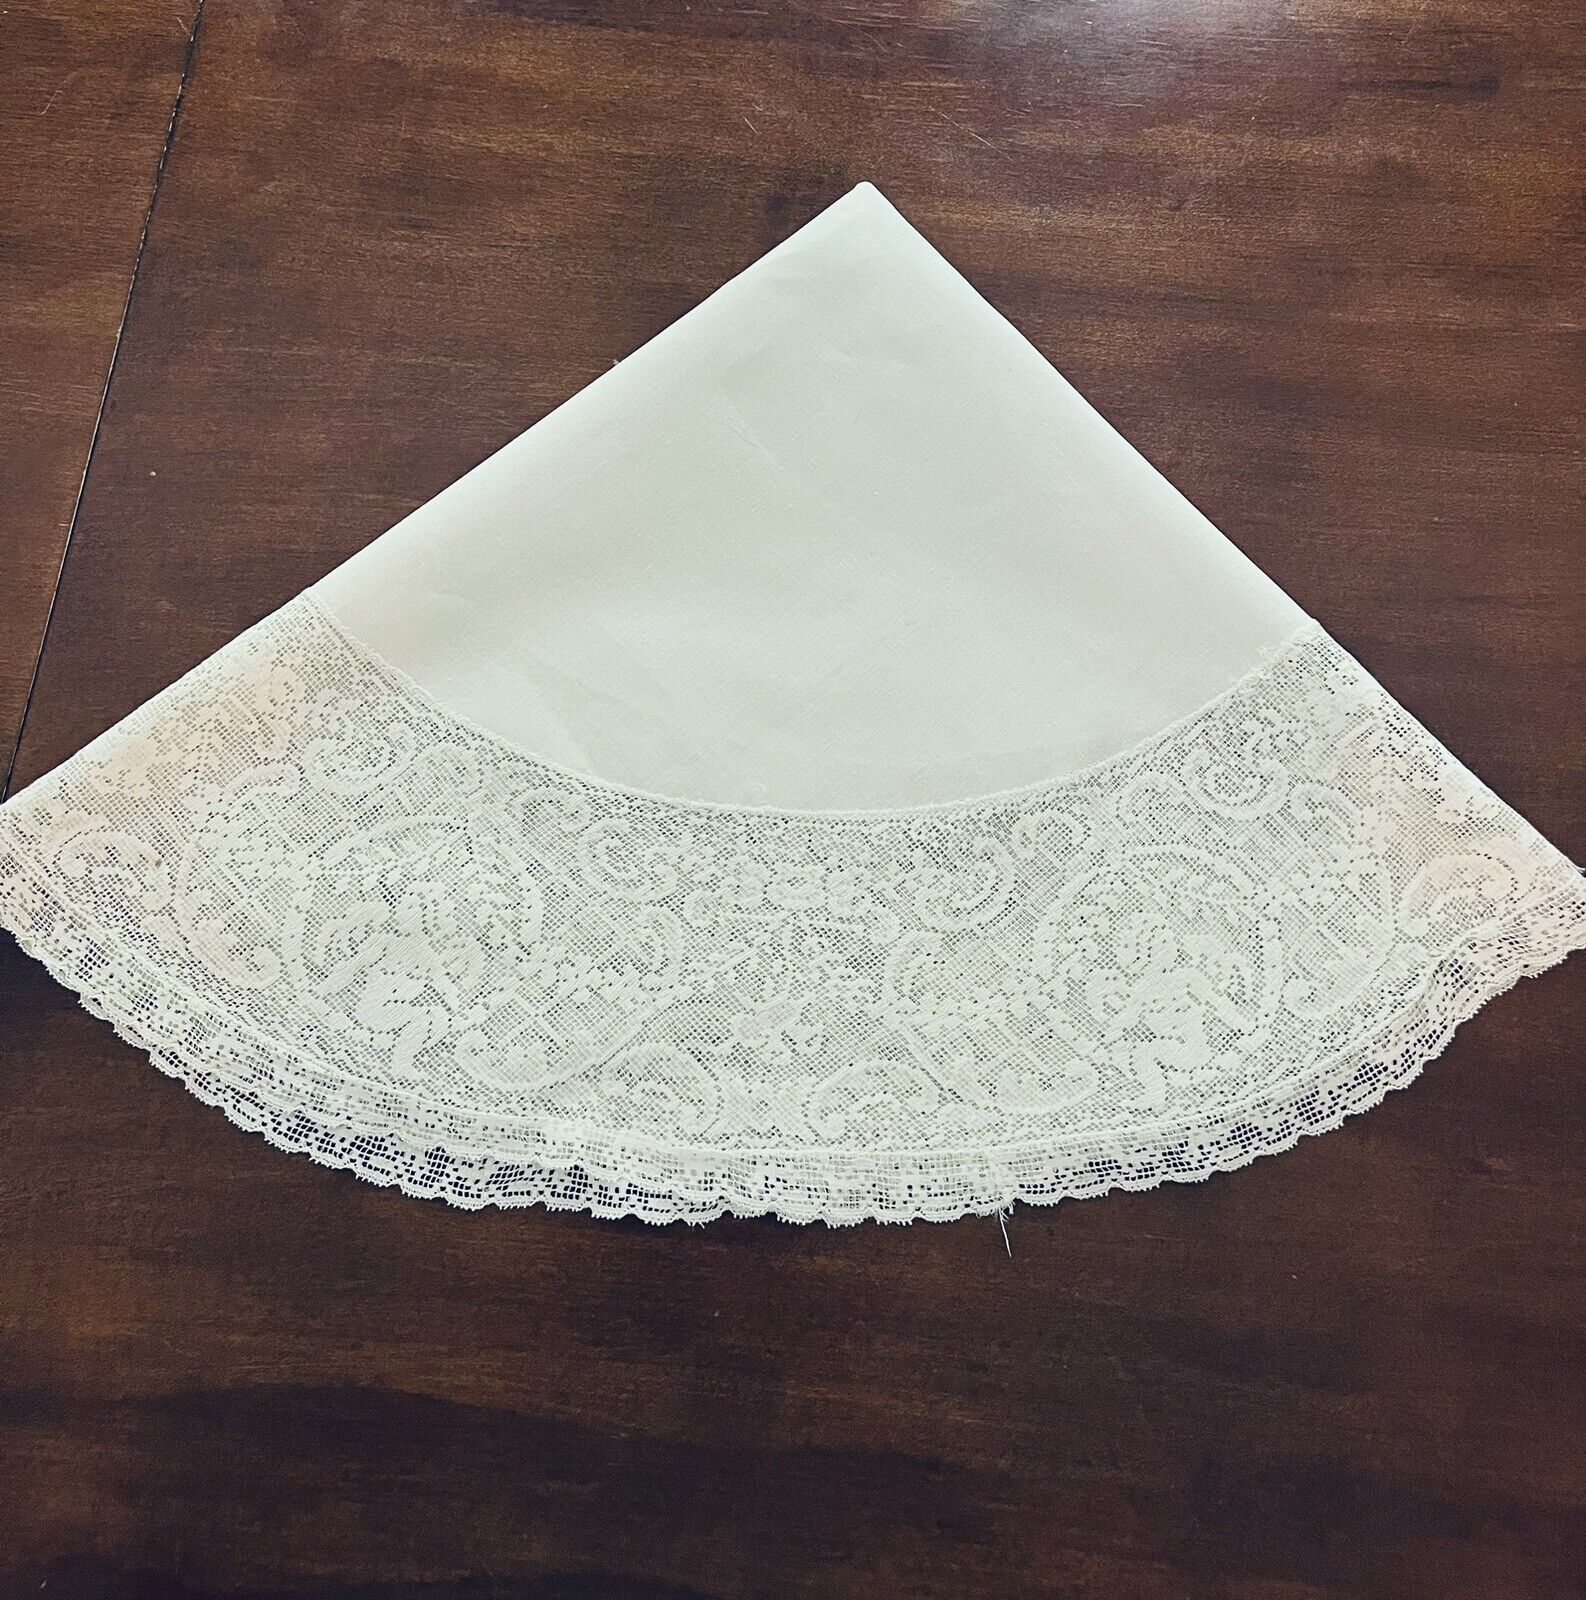 Vintage Round Tablecloth With 6 Inch Italian Figural Lace Border cherubs